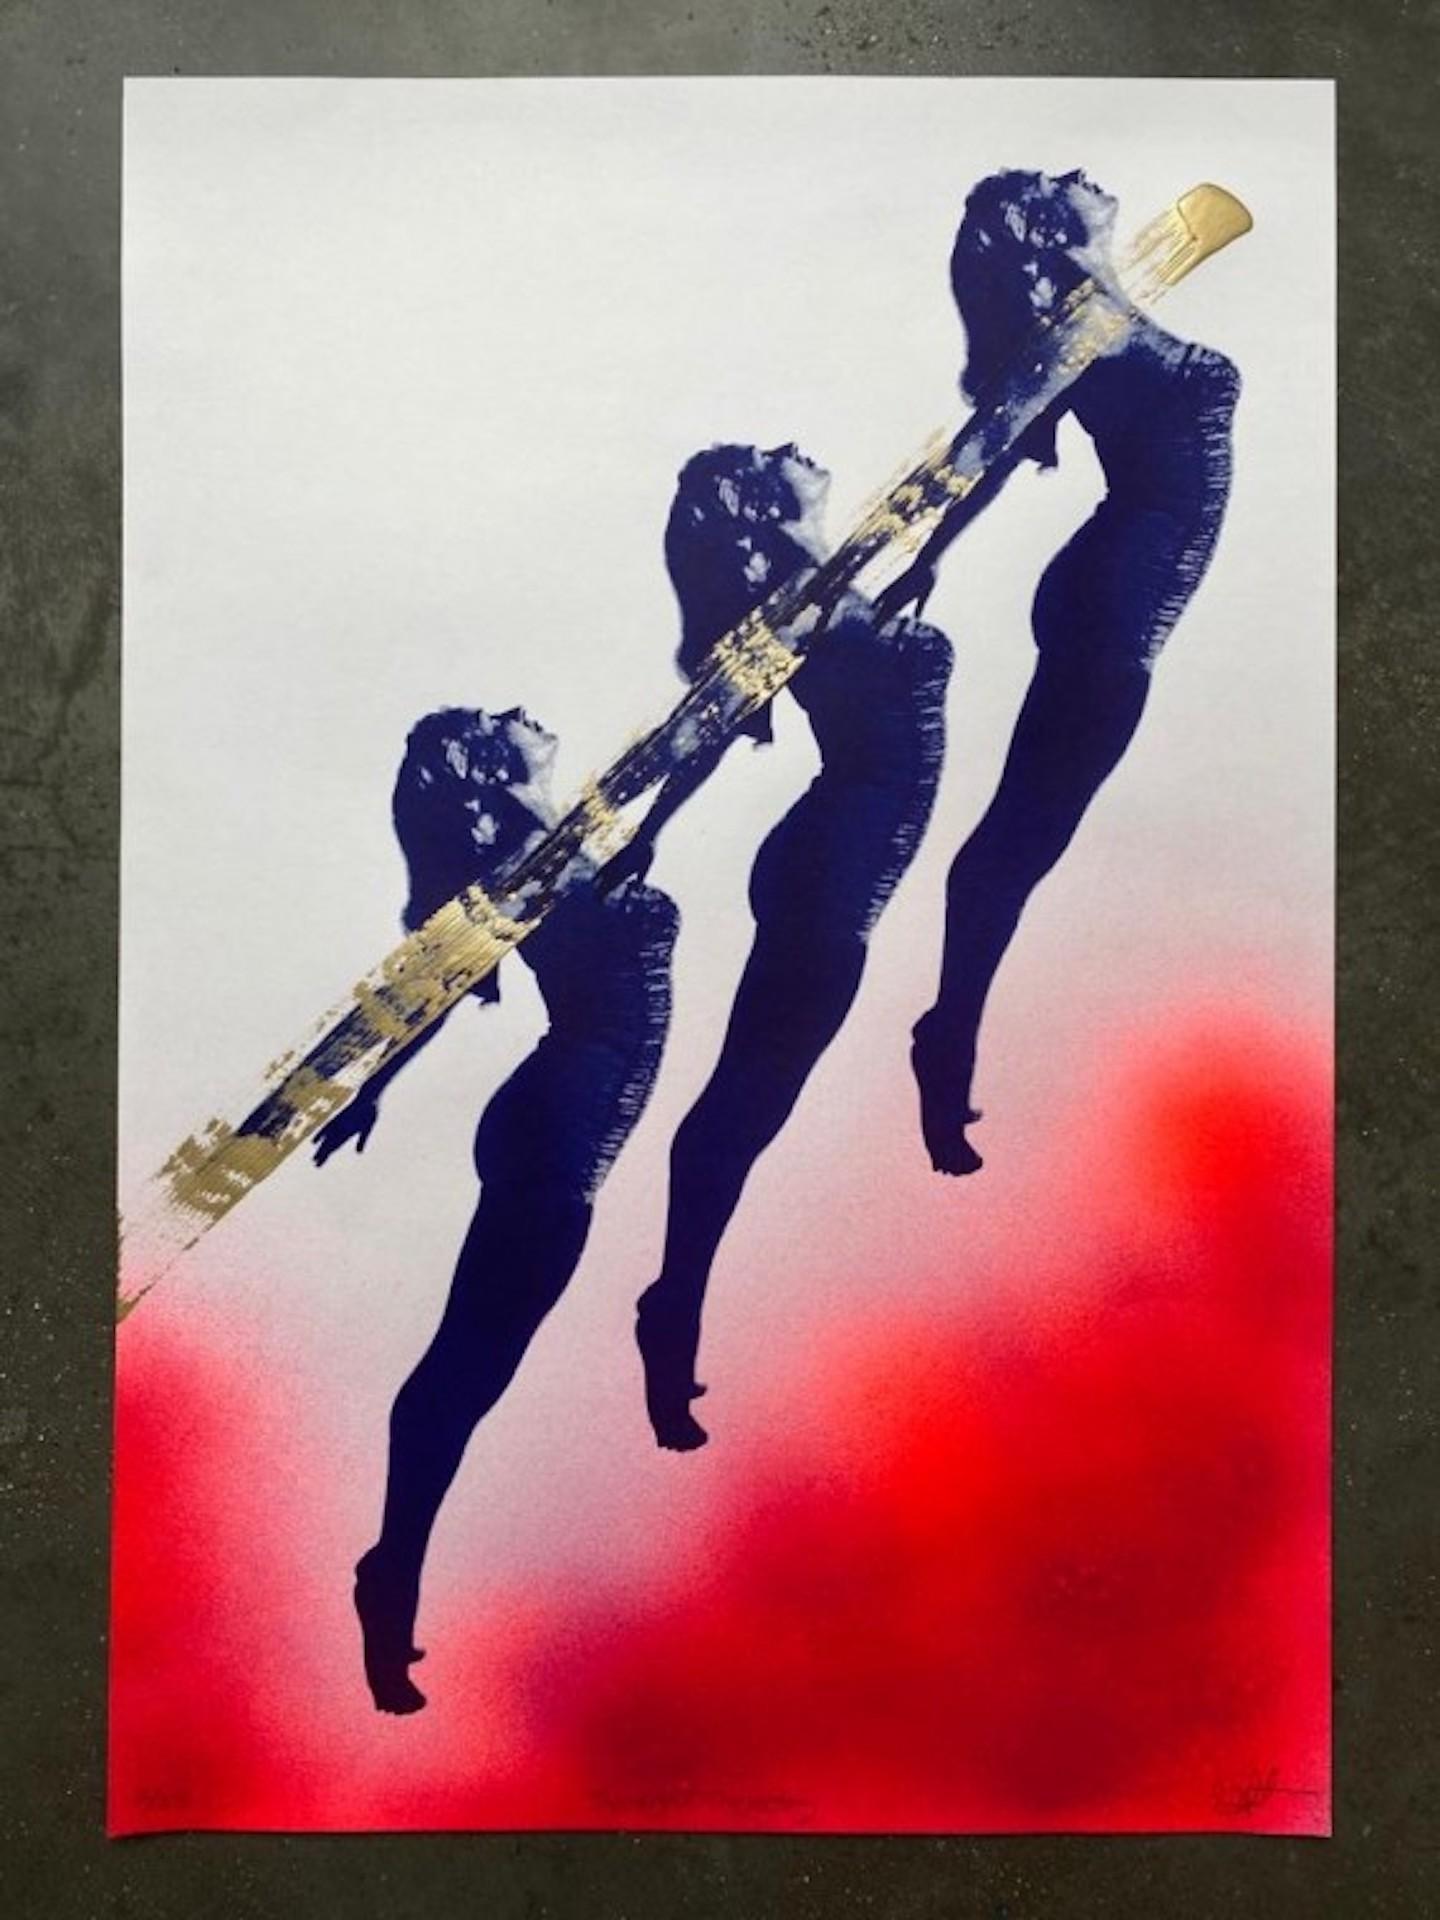 The Right Trajectory [2021]
Limited Edition
Figurative
Screen Print, Spray Paint, Acrylic Paint
Edition of 25
Size: H:65 cm x W:45 cm
Sold Unframed
Please note that insitu images are purely an indication of how a piece may look

The Right Trajectory